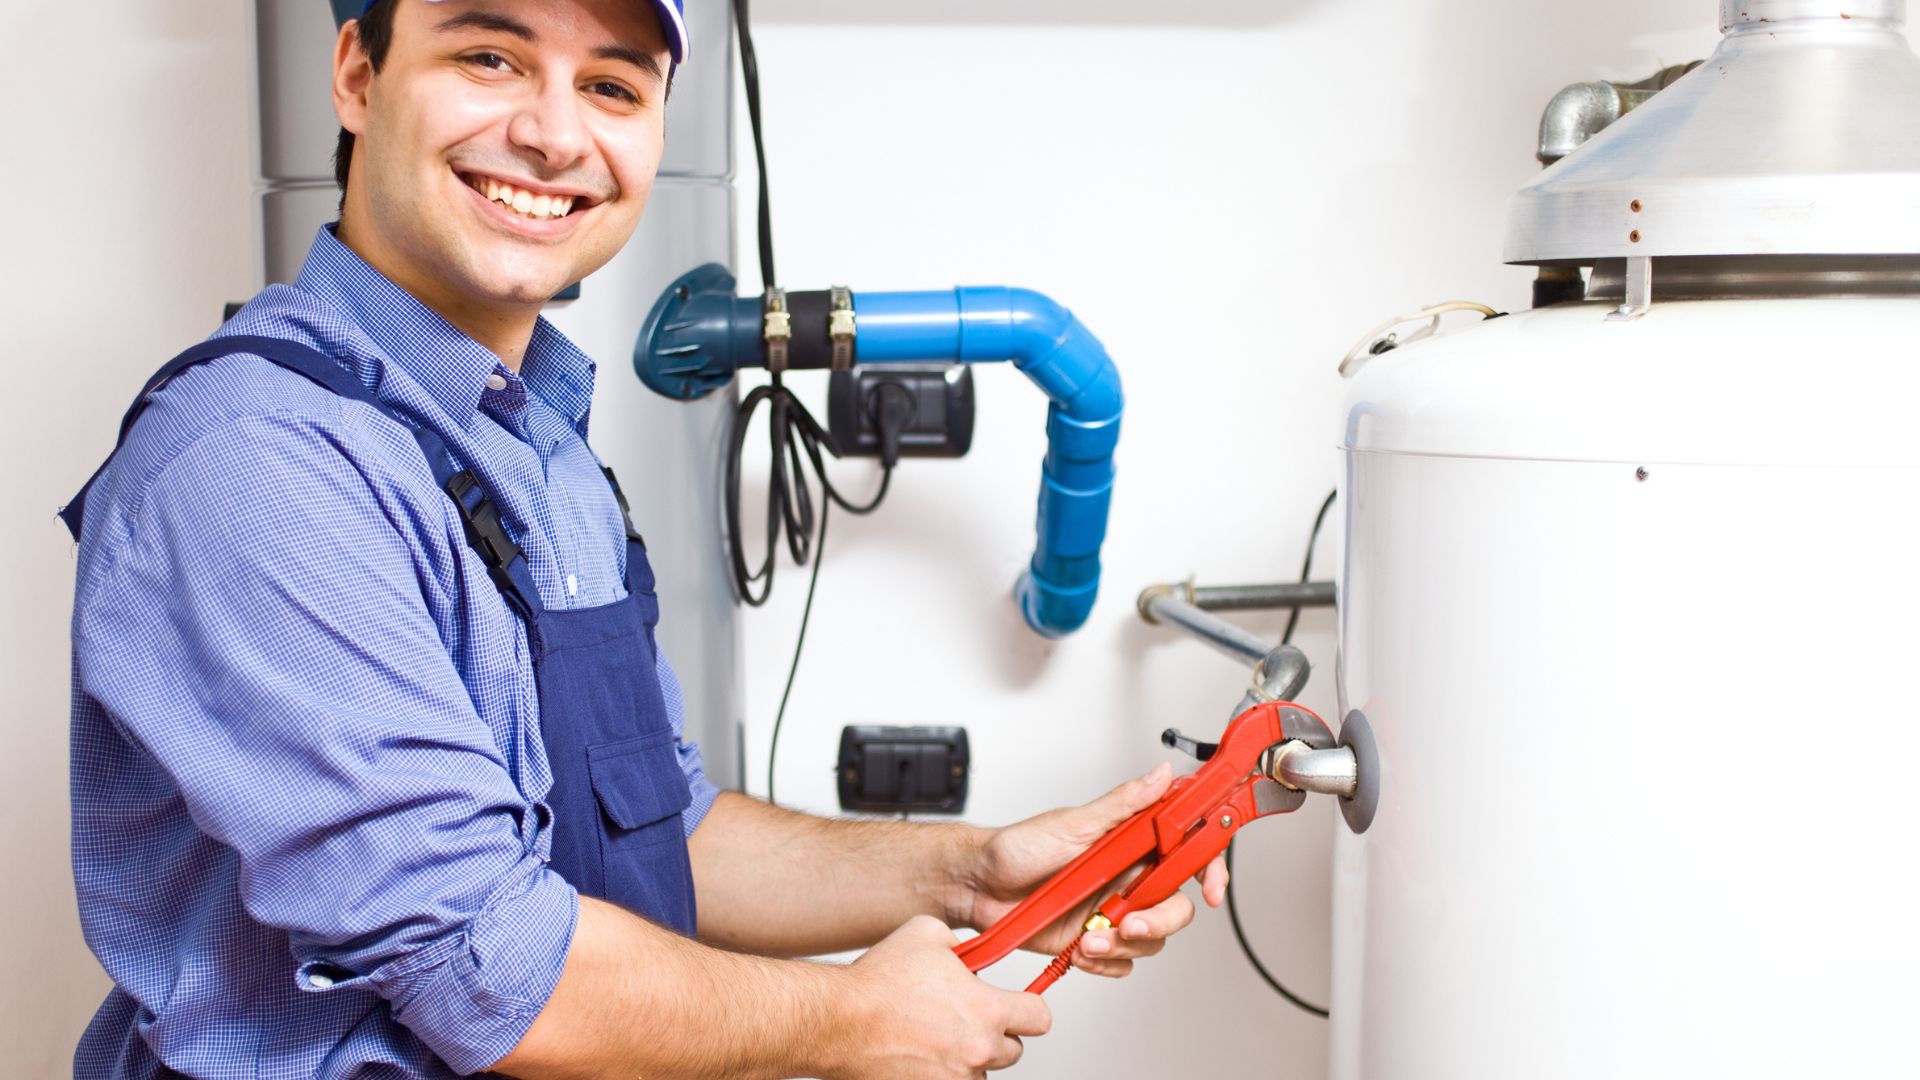 Contact CAN Plumbing and Drainage for all your water heater requirements, managed by our expert plumbers.